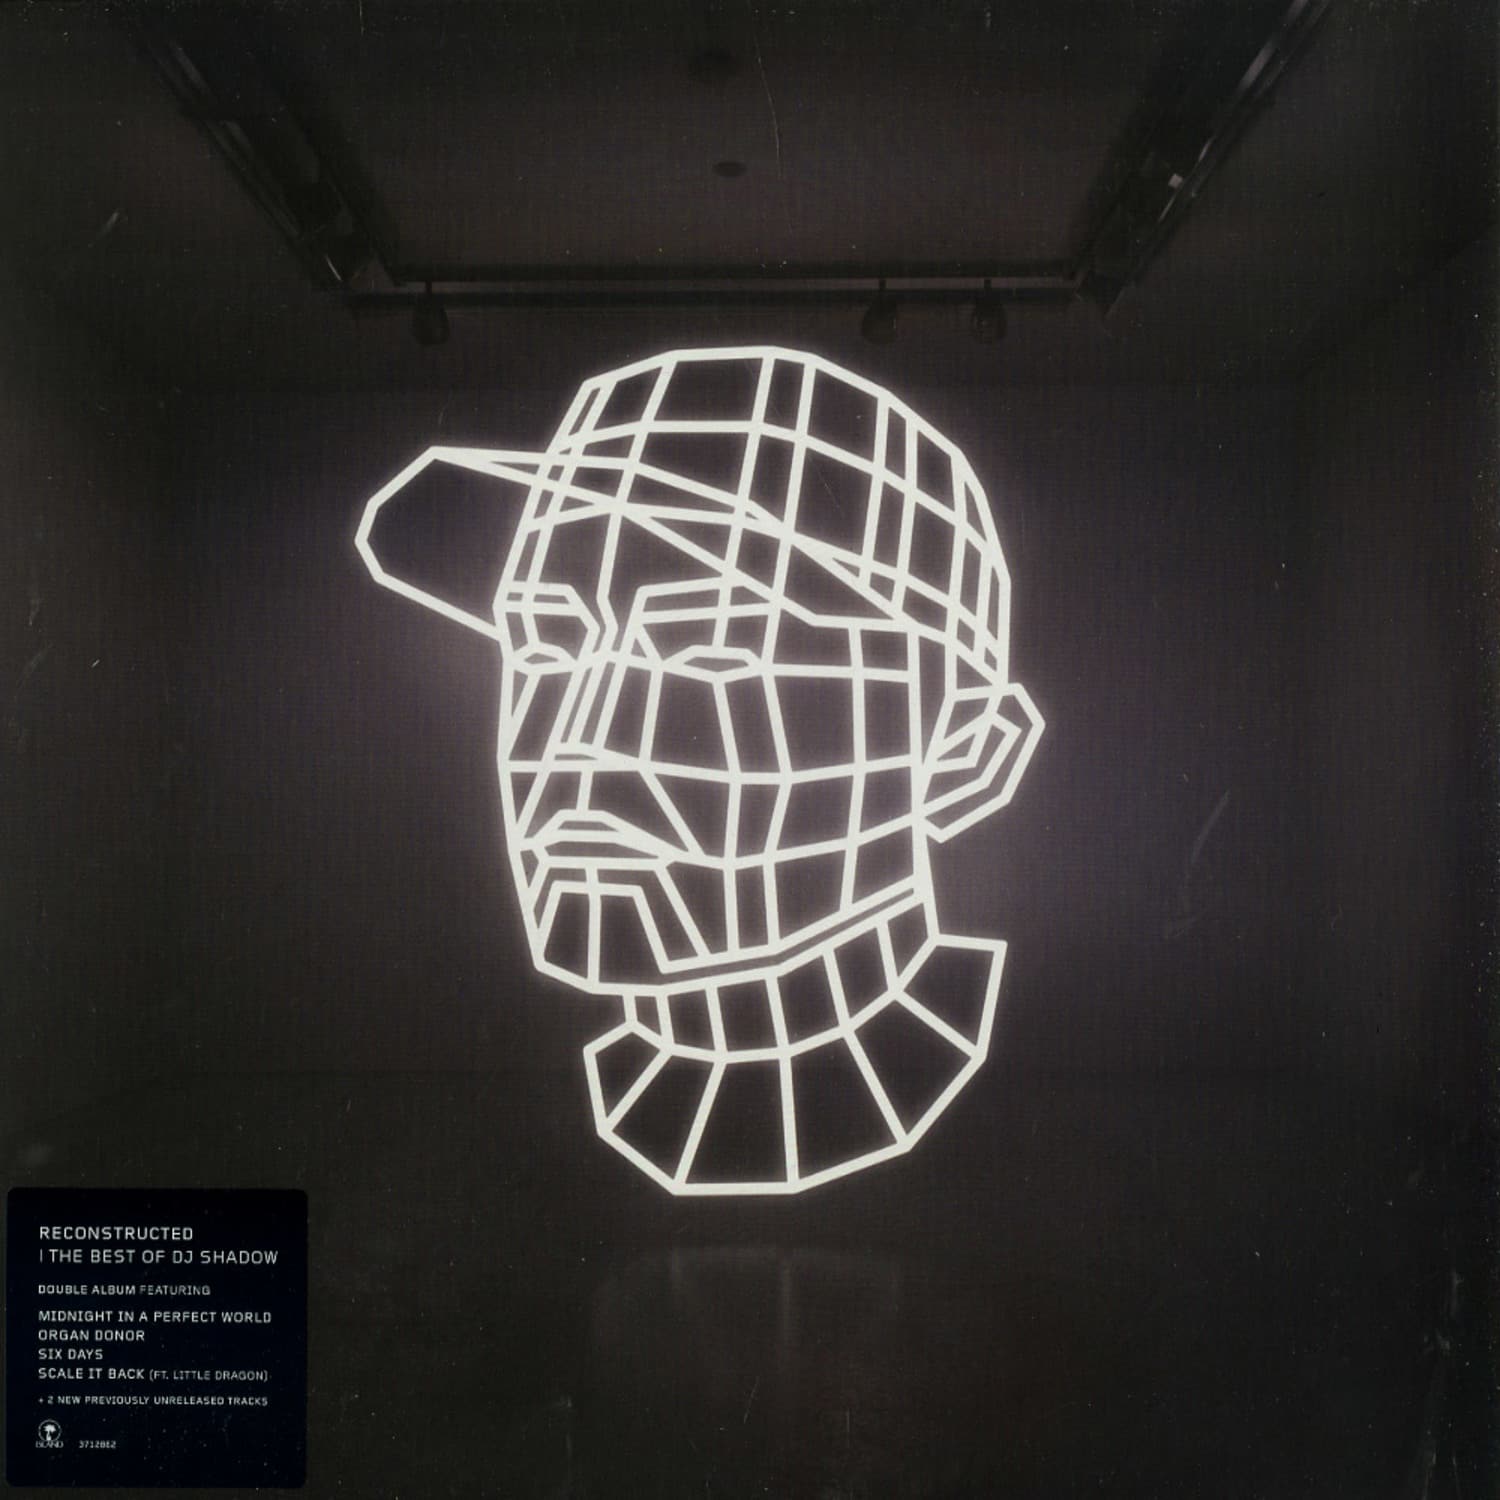 DJ Shadow - RECONSTRUCTED - THE BEST OF DJ SHADOW 